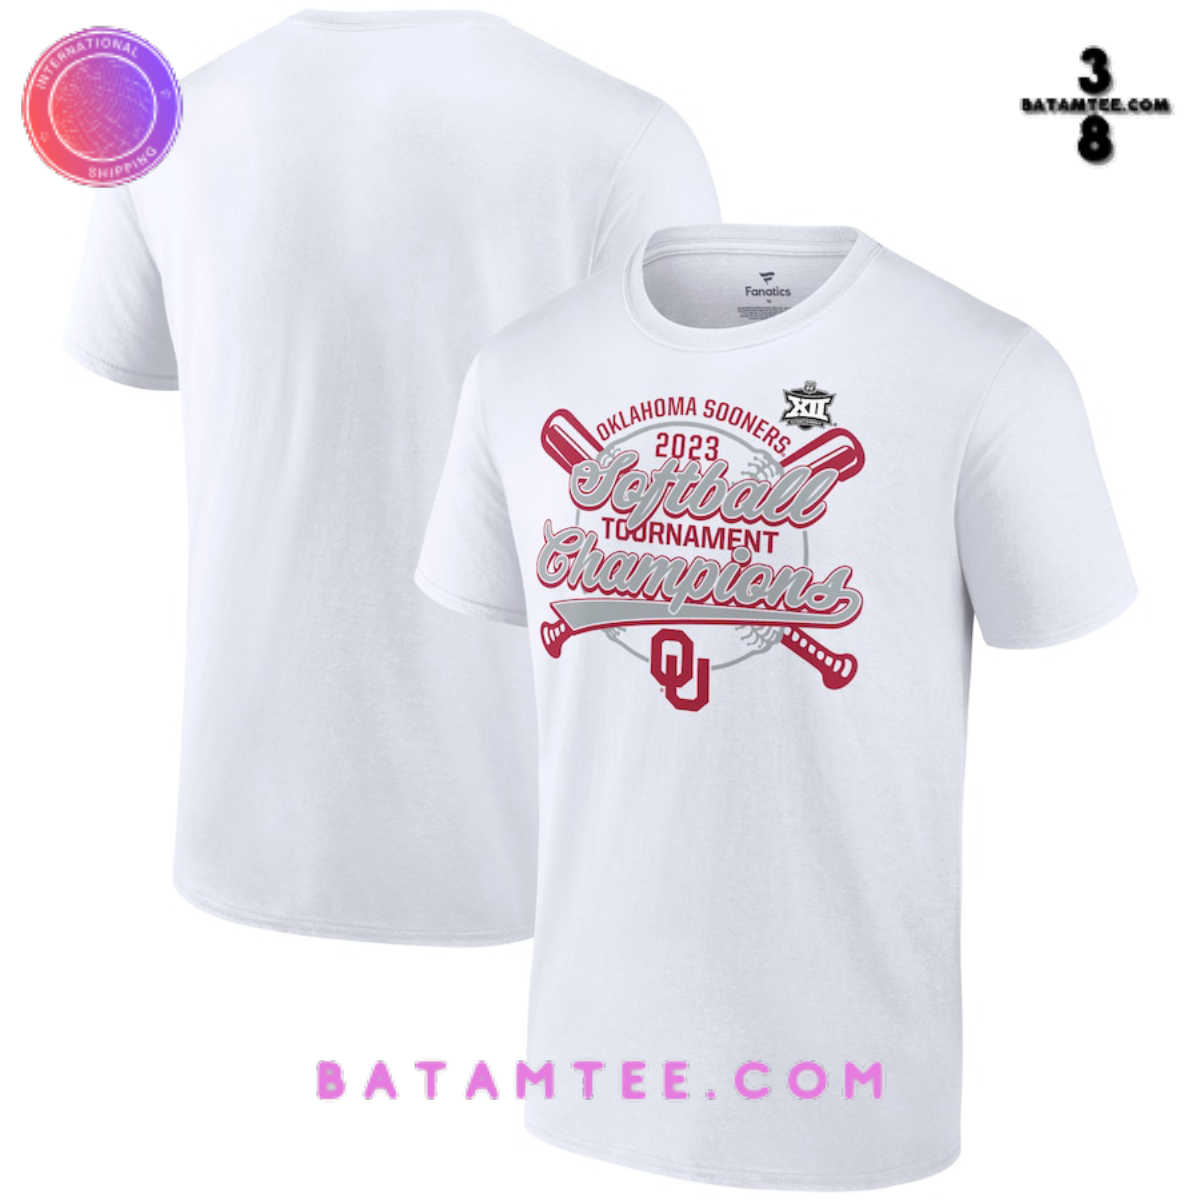 New product from Batamtee on 10/22/2023 - Batamtee Shop - Threads & Totes: Your Style Destination